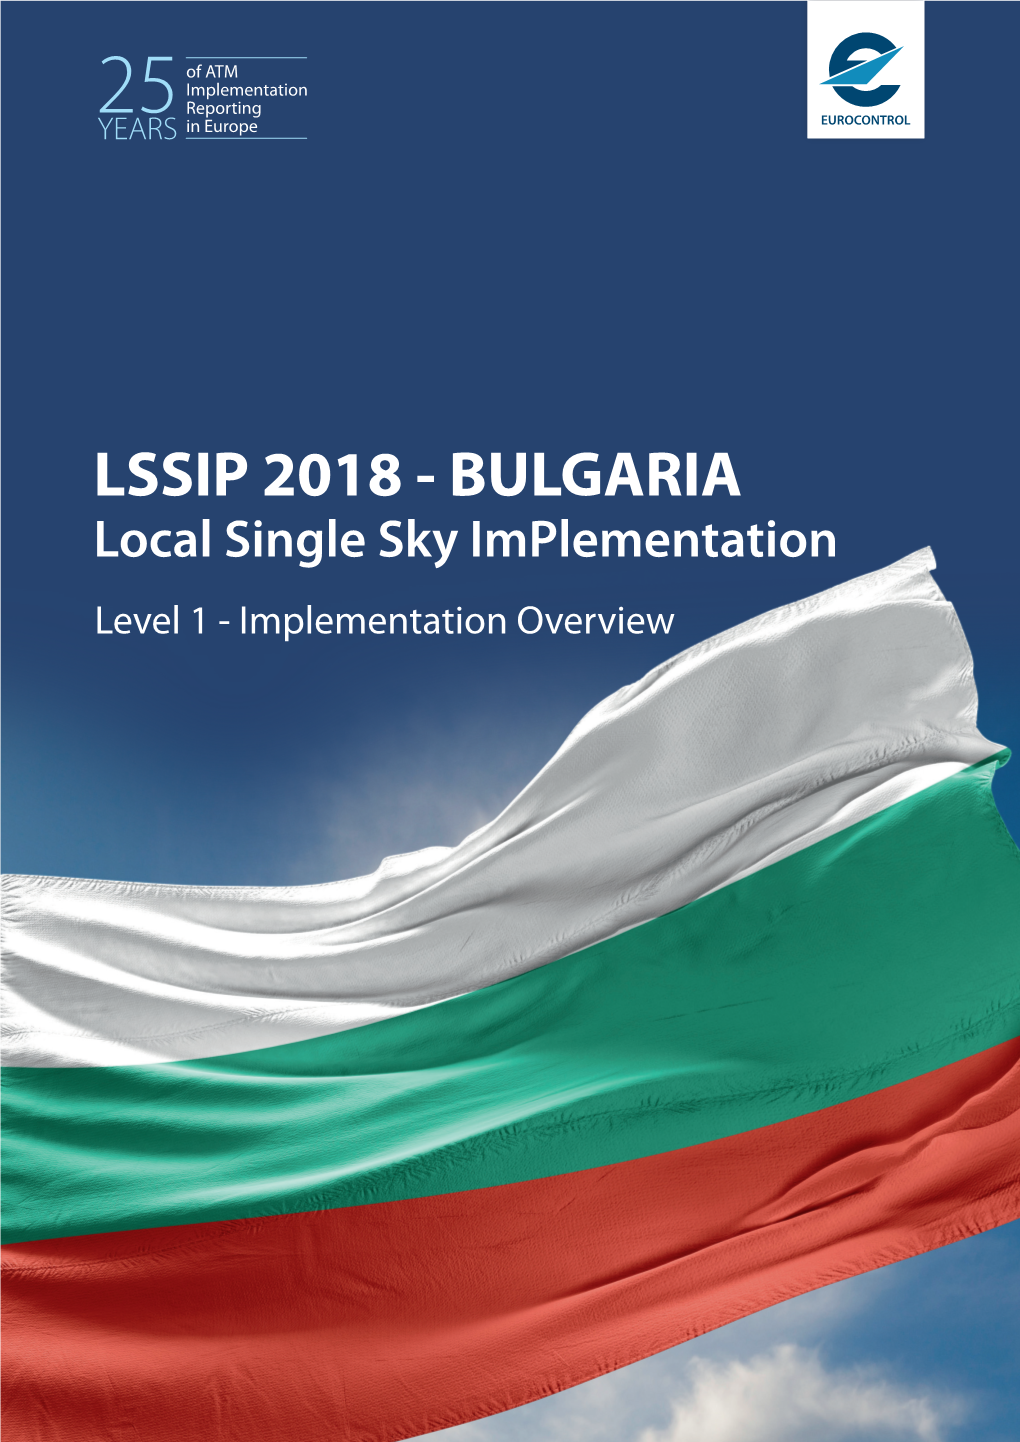 BULGARIA Local Single Sky Implementation Level 1 - Implementation Overview